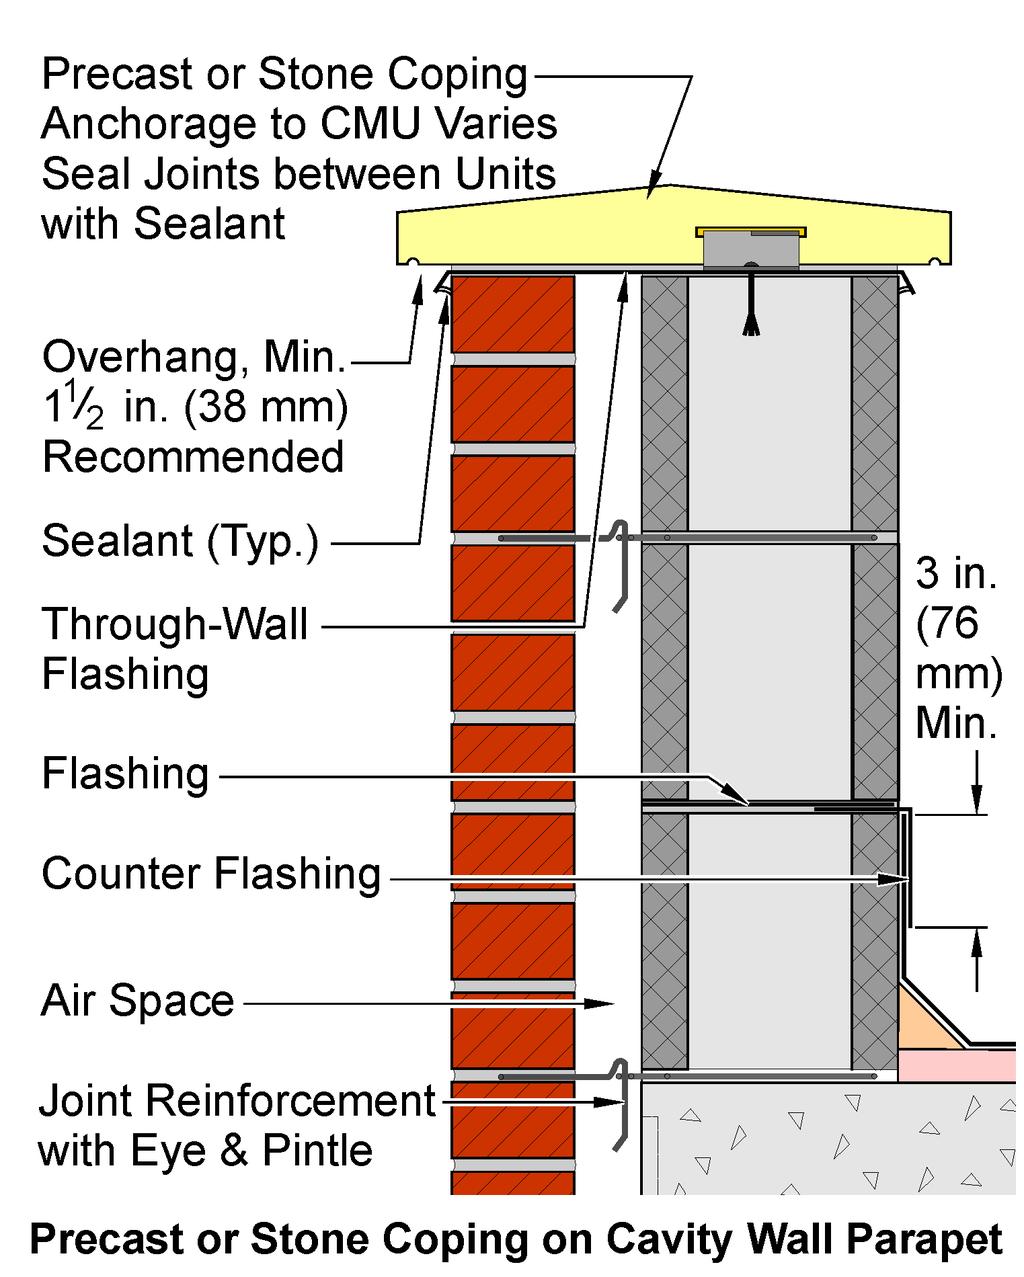 Figure 21 Metal Coping on Cavity Wall Parapet snow. They should be sloped away from the wall to drain and should be flashed where possible, similar to sill conditions, as shown in Figure 19.